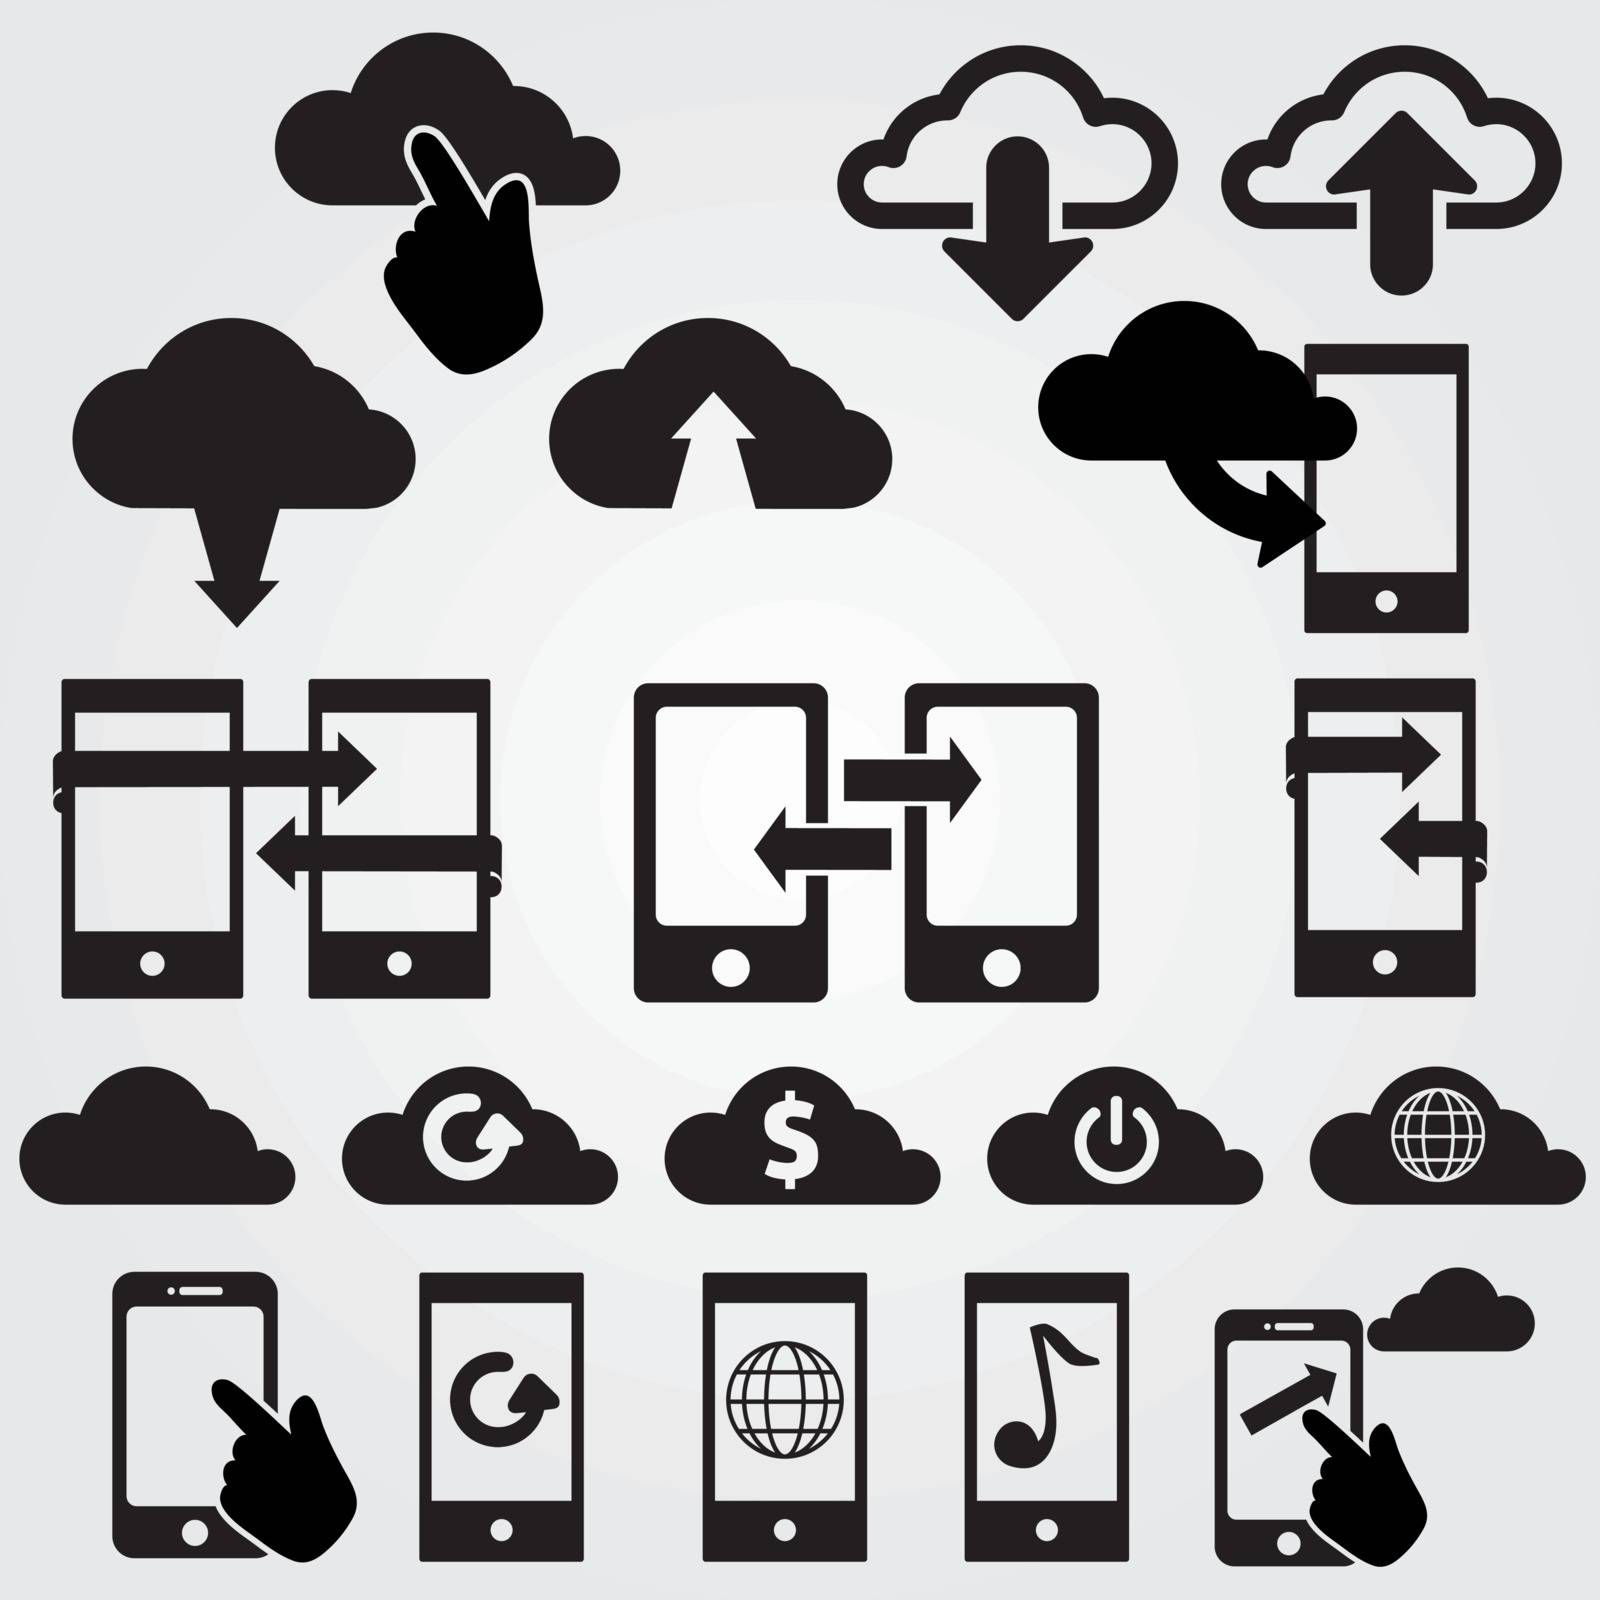 cloud app icon on mobile phone vector icons set